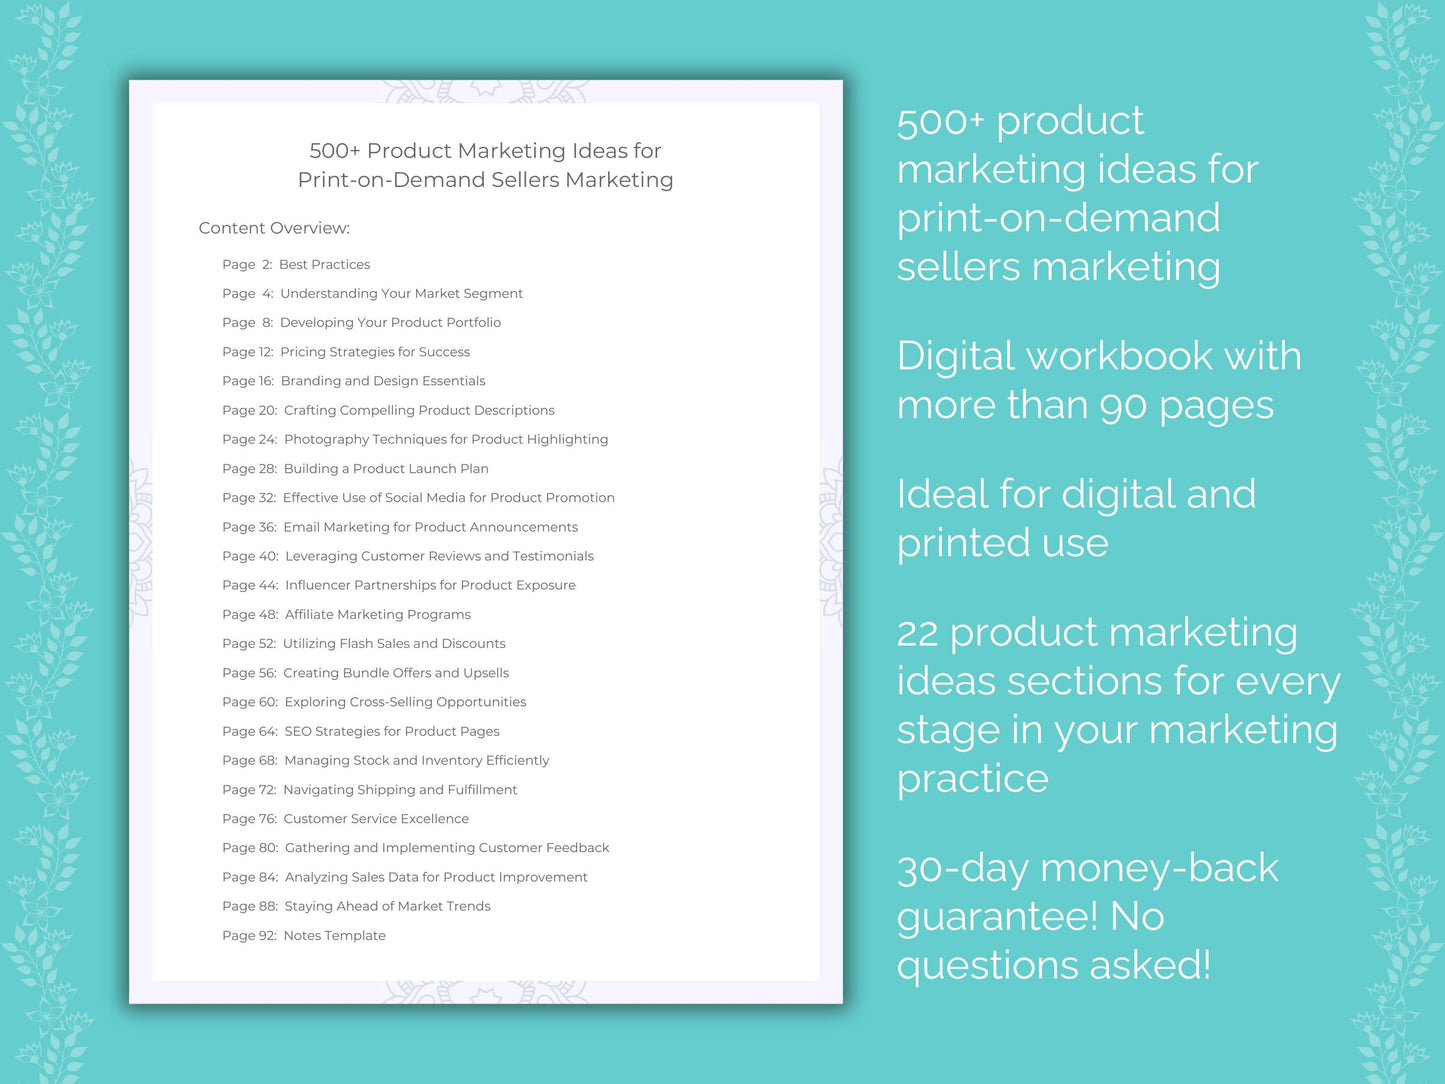 Print-on-Demand Sellers Product Marketing Ideas Resource